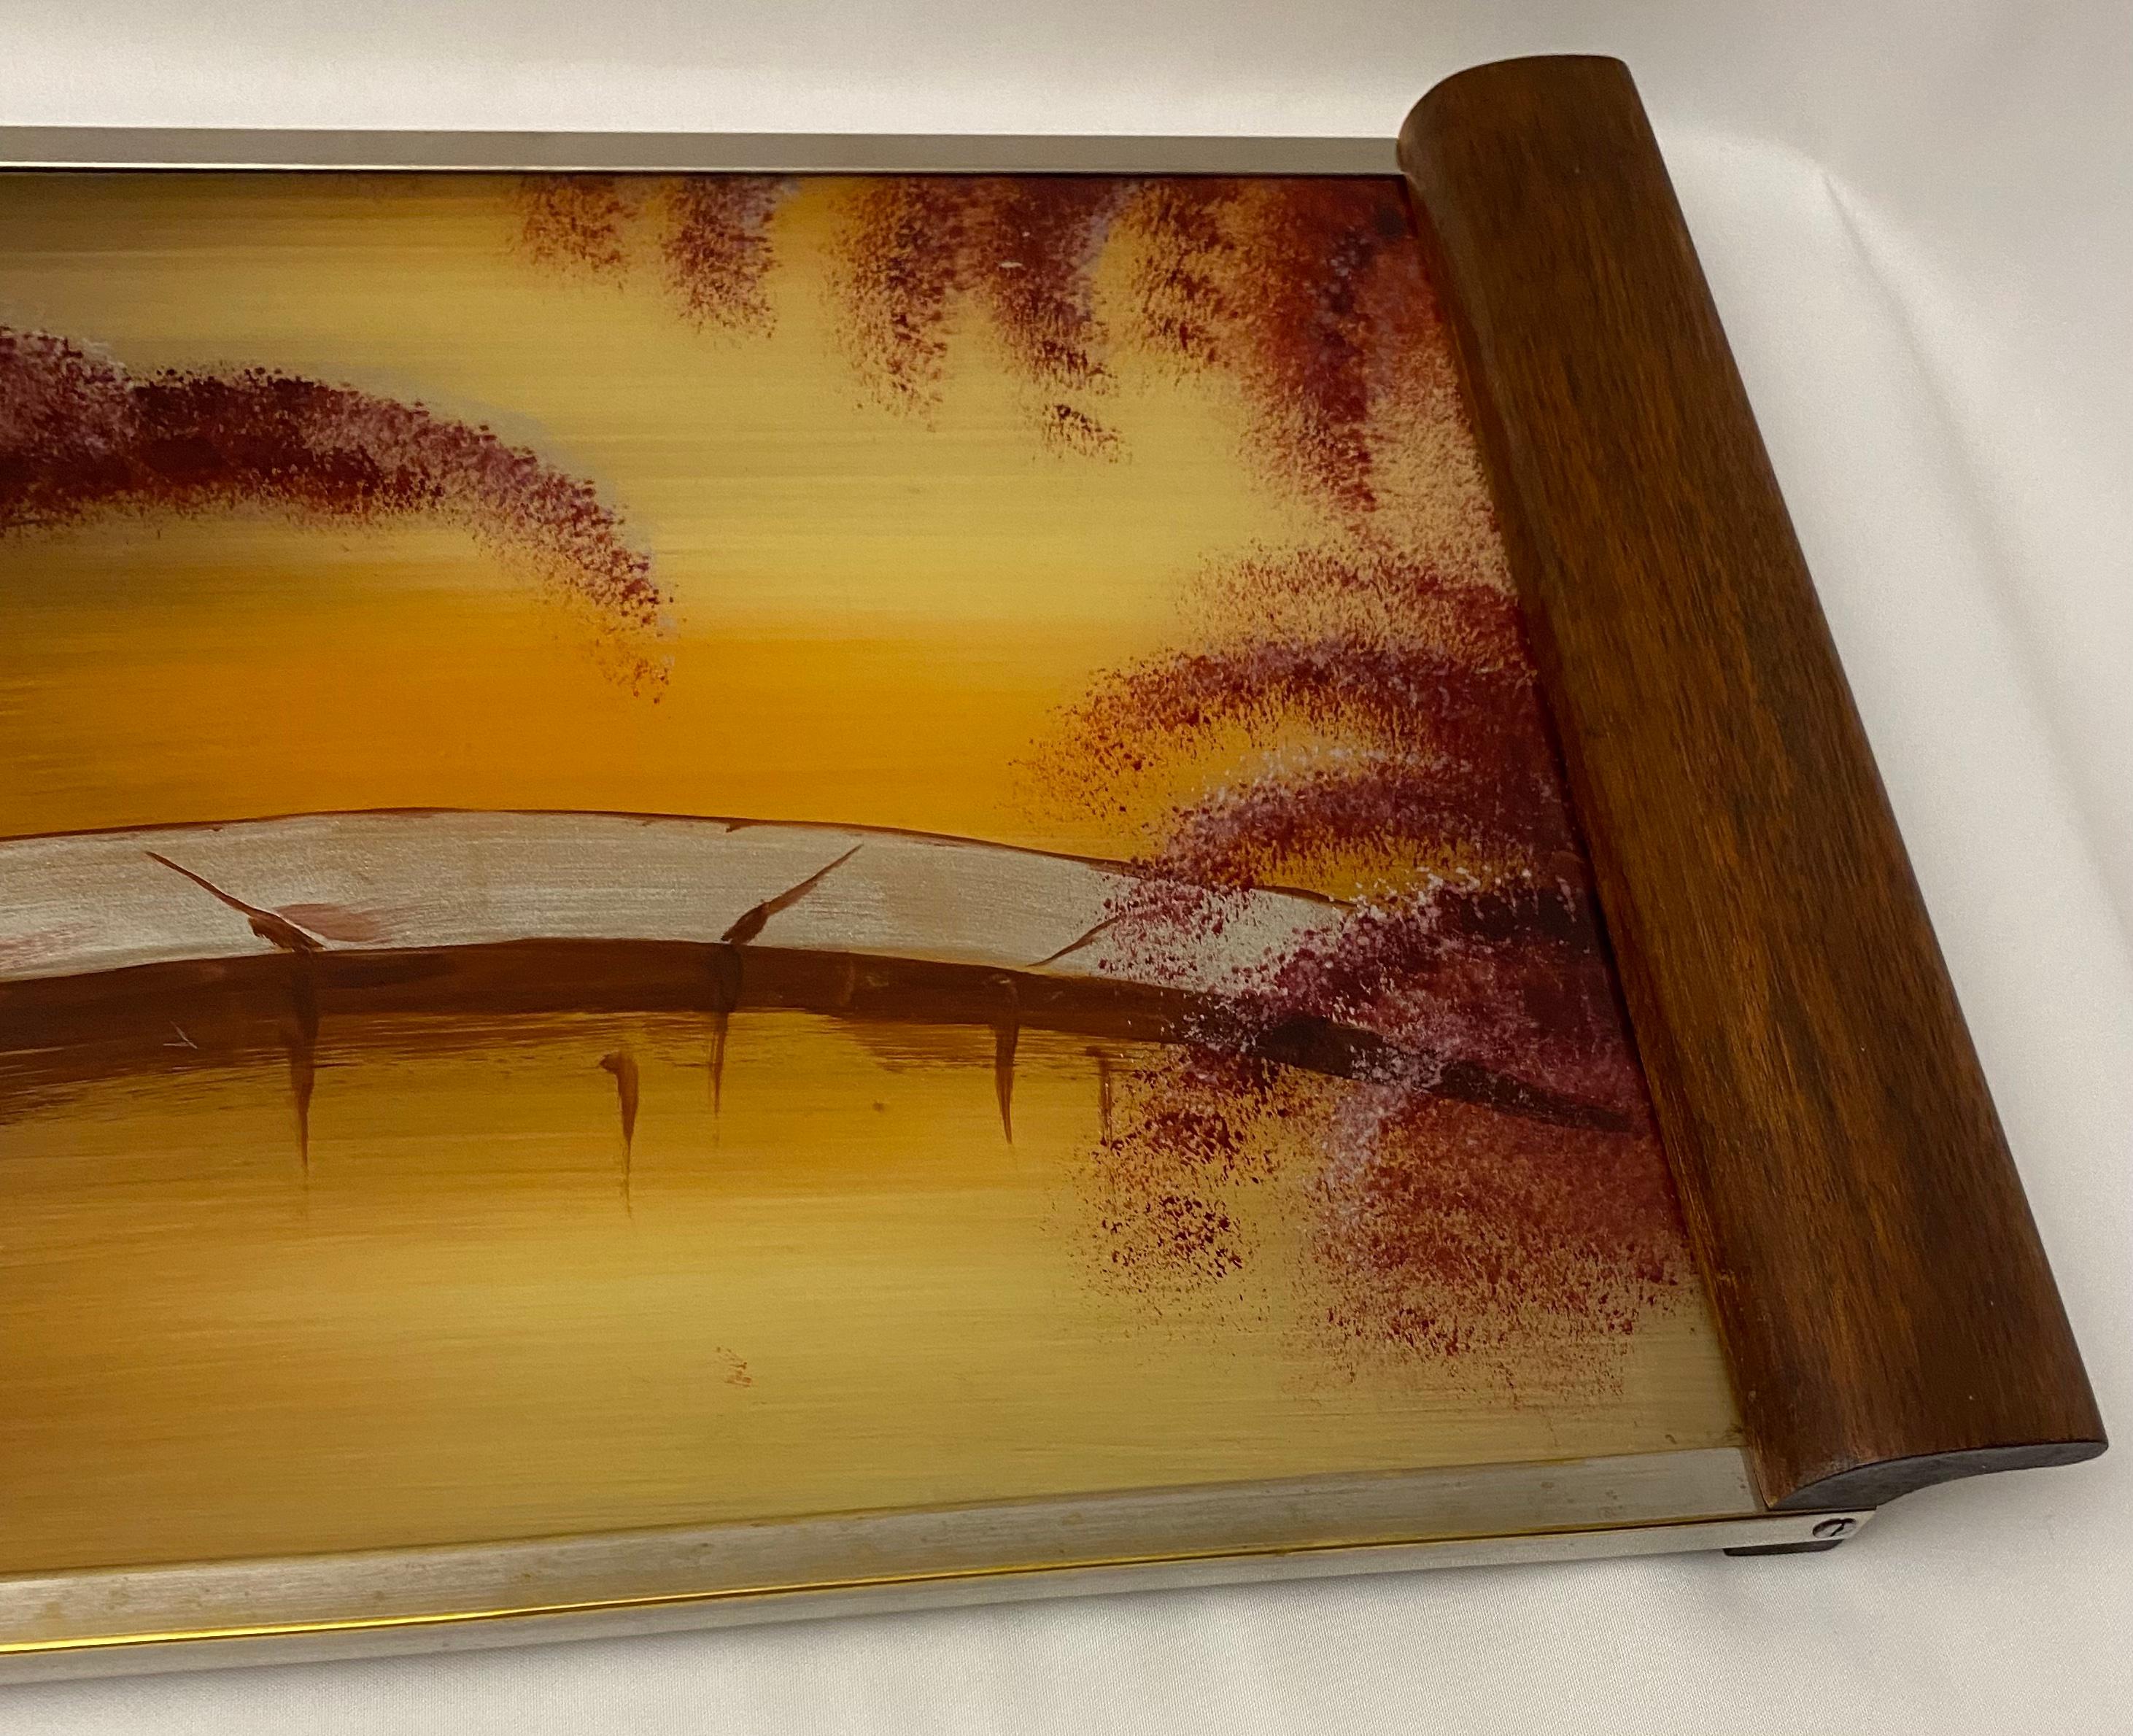 This elegant serving tray features Japanese cherry blossom scenes painted on glass and art deco period designs. This is a beautiful example perfect for collectors of Art Deco objects or for someone simply looking for a lovely tray to present drinks